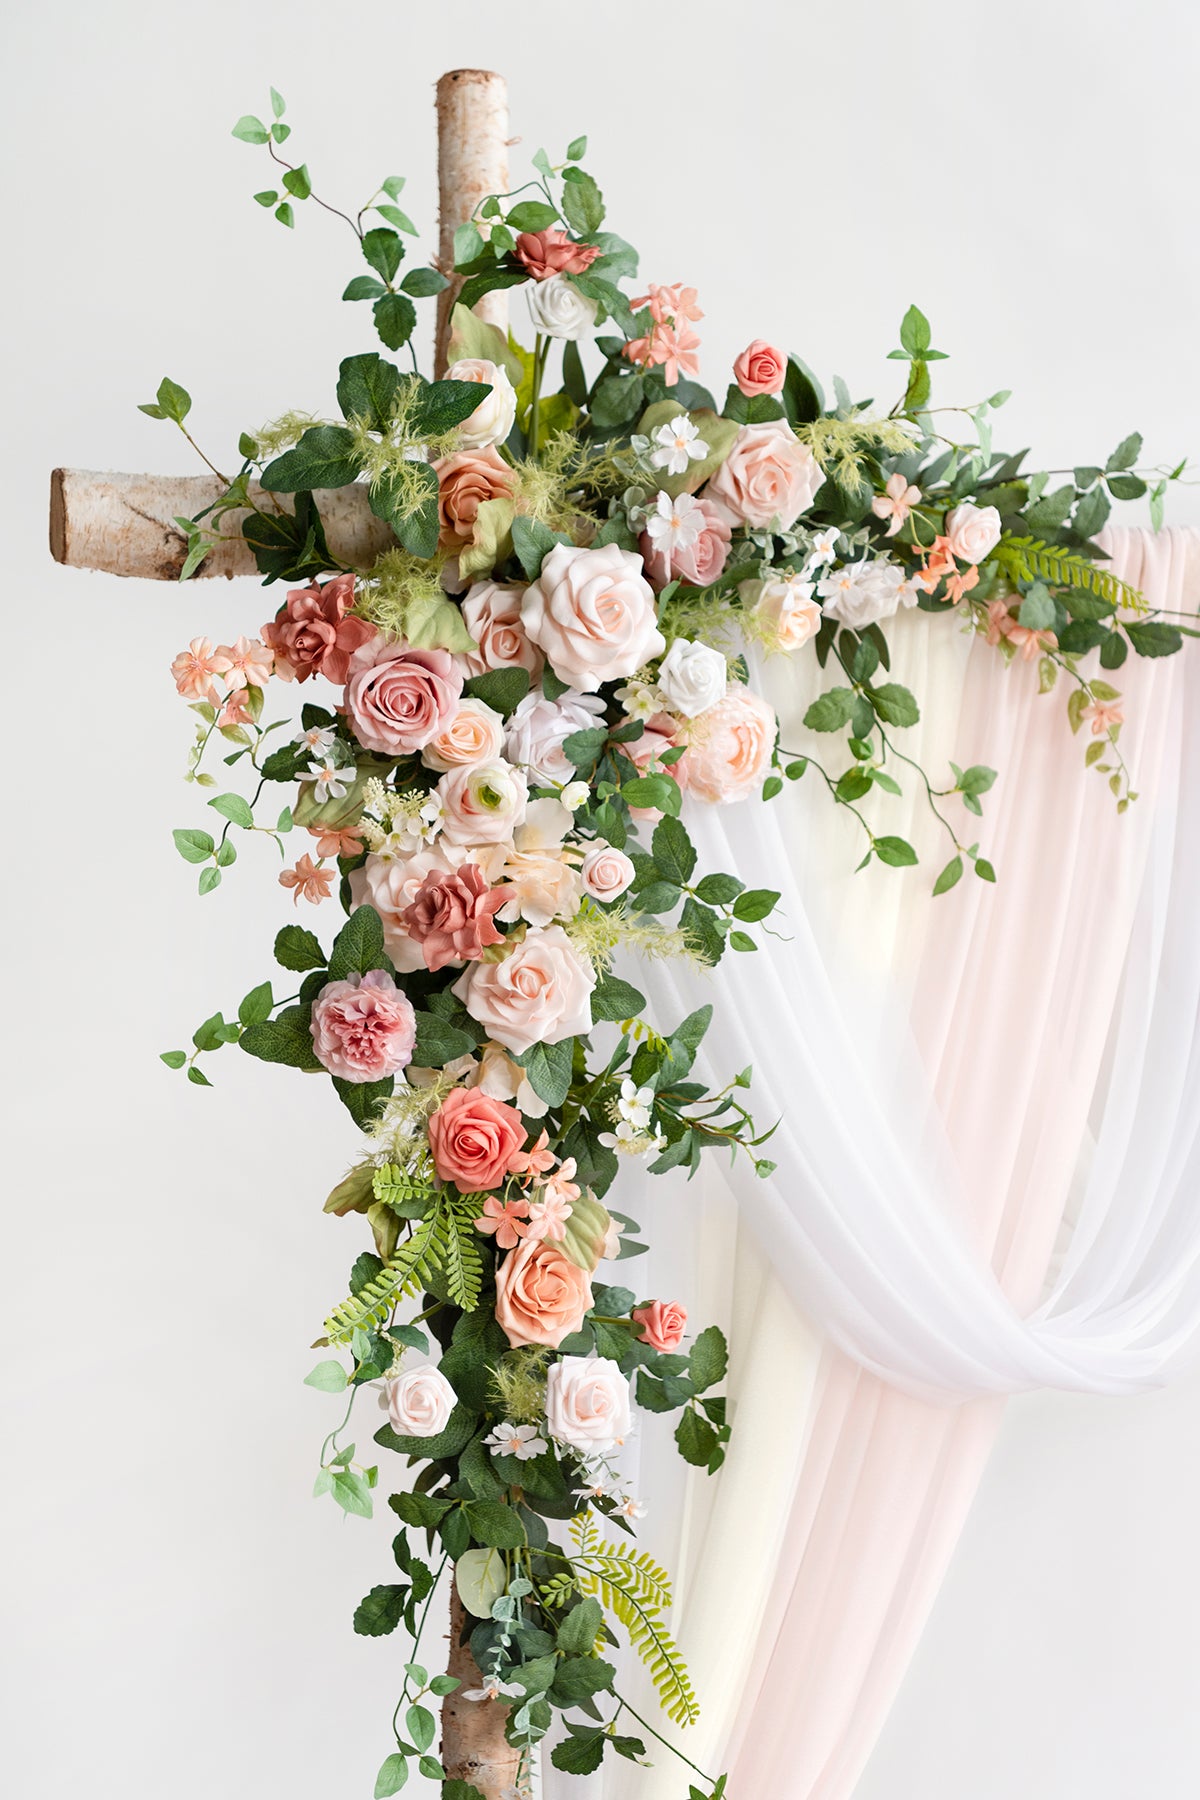 Flower Arch Decor with Drapes in Garden Blush